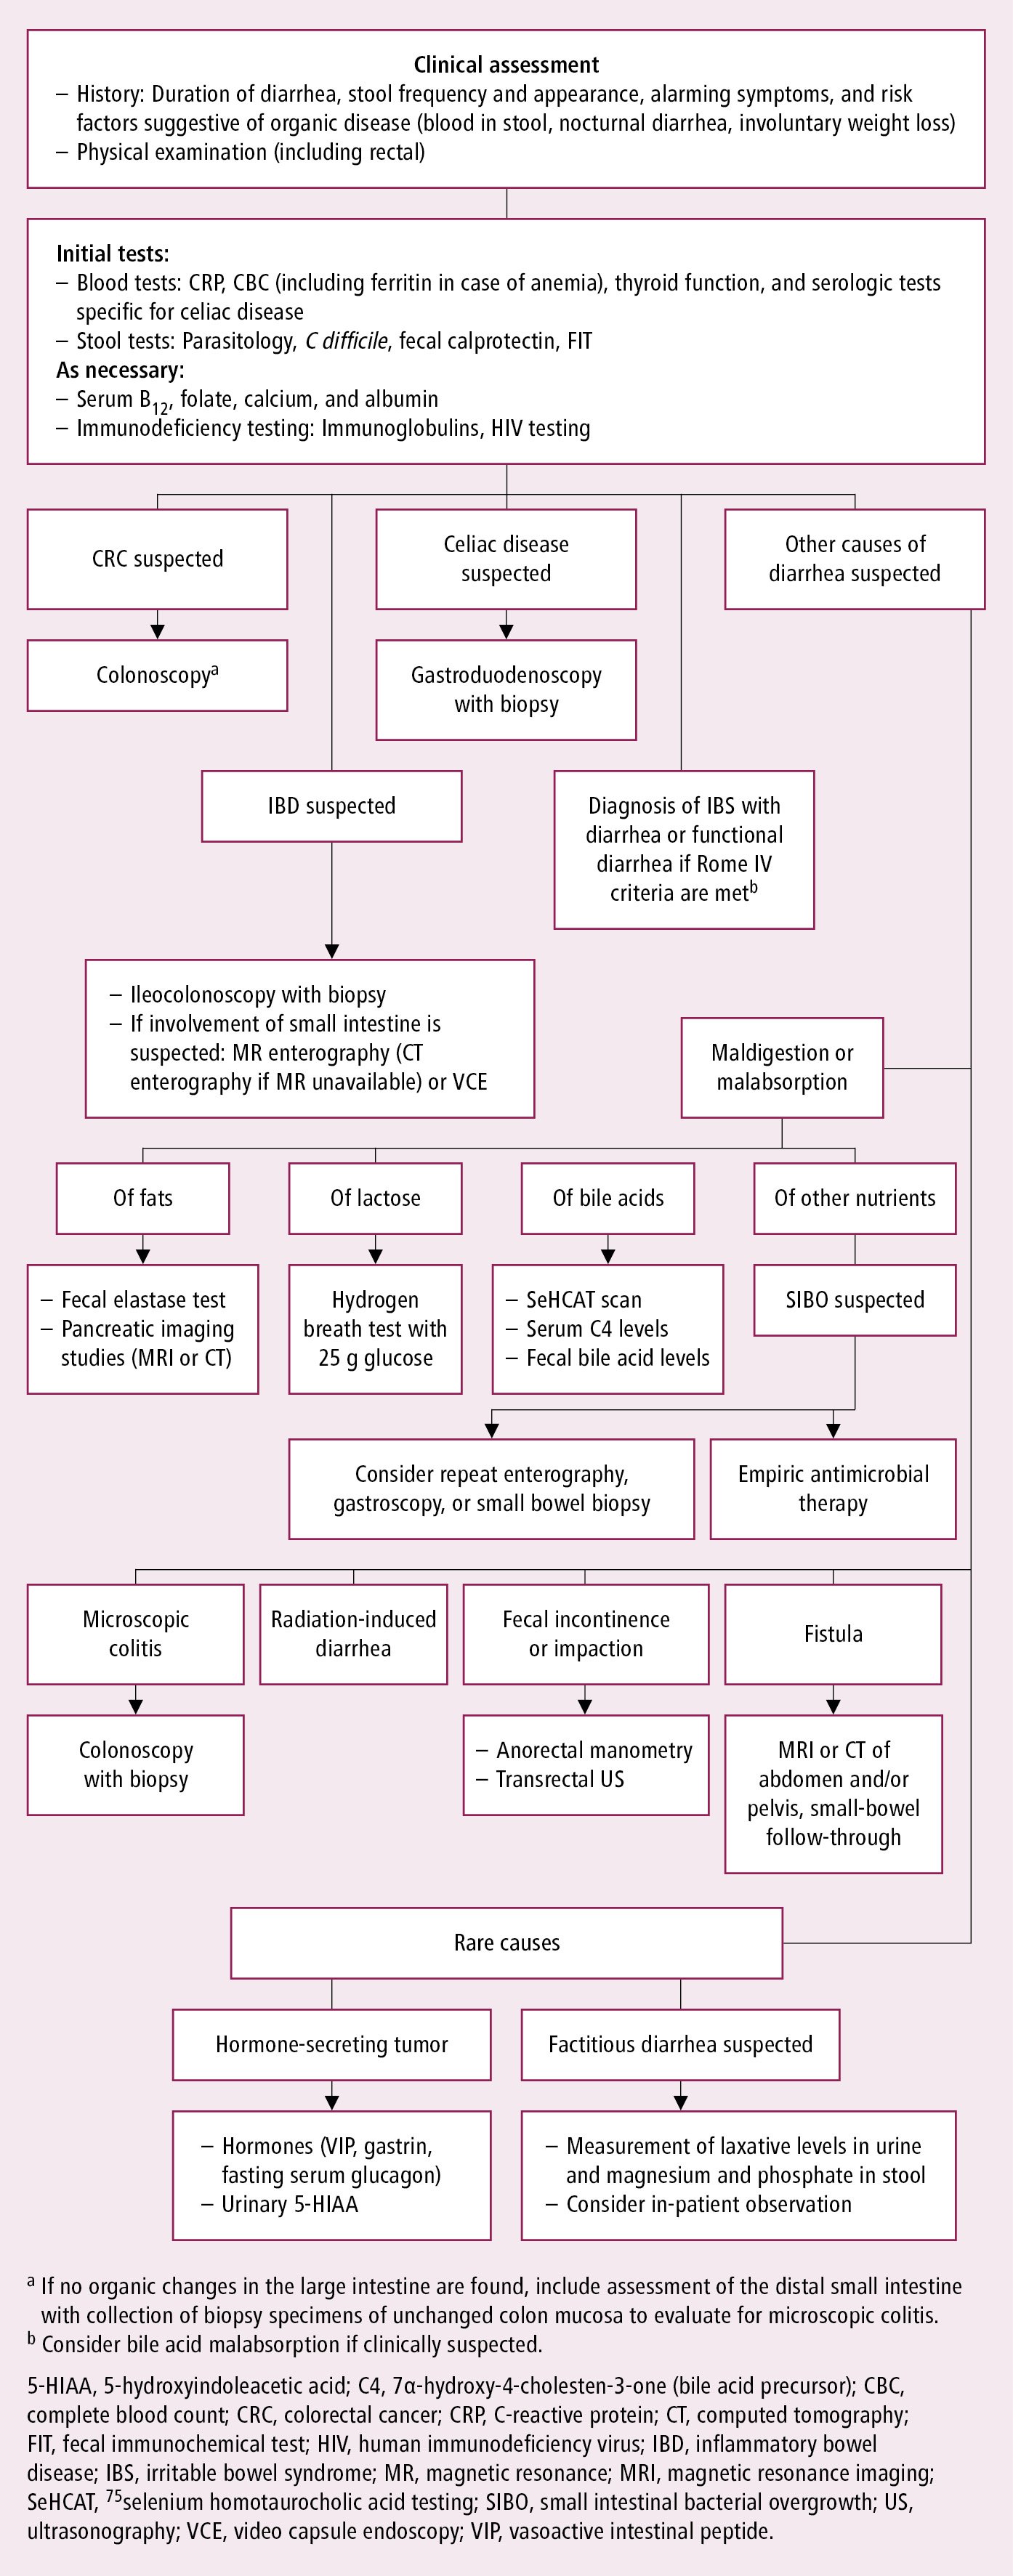 Figure 031_6625.  Algorithm for the diagnosis of chronic diarrhea.  Adapted from    Gut. 2018;67(8):1380-1399   .  